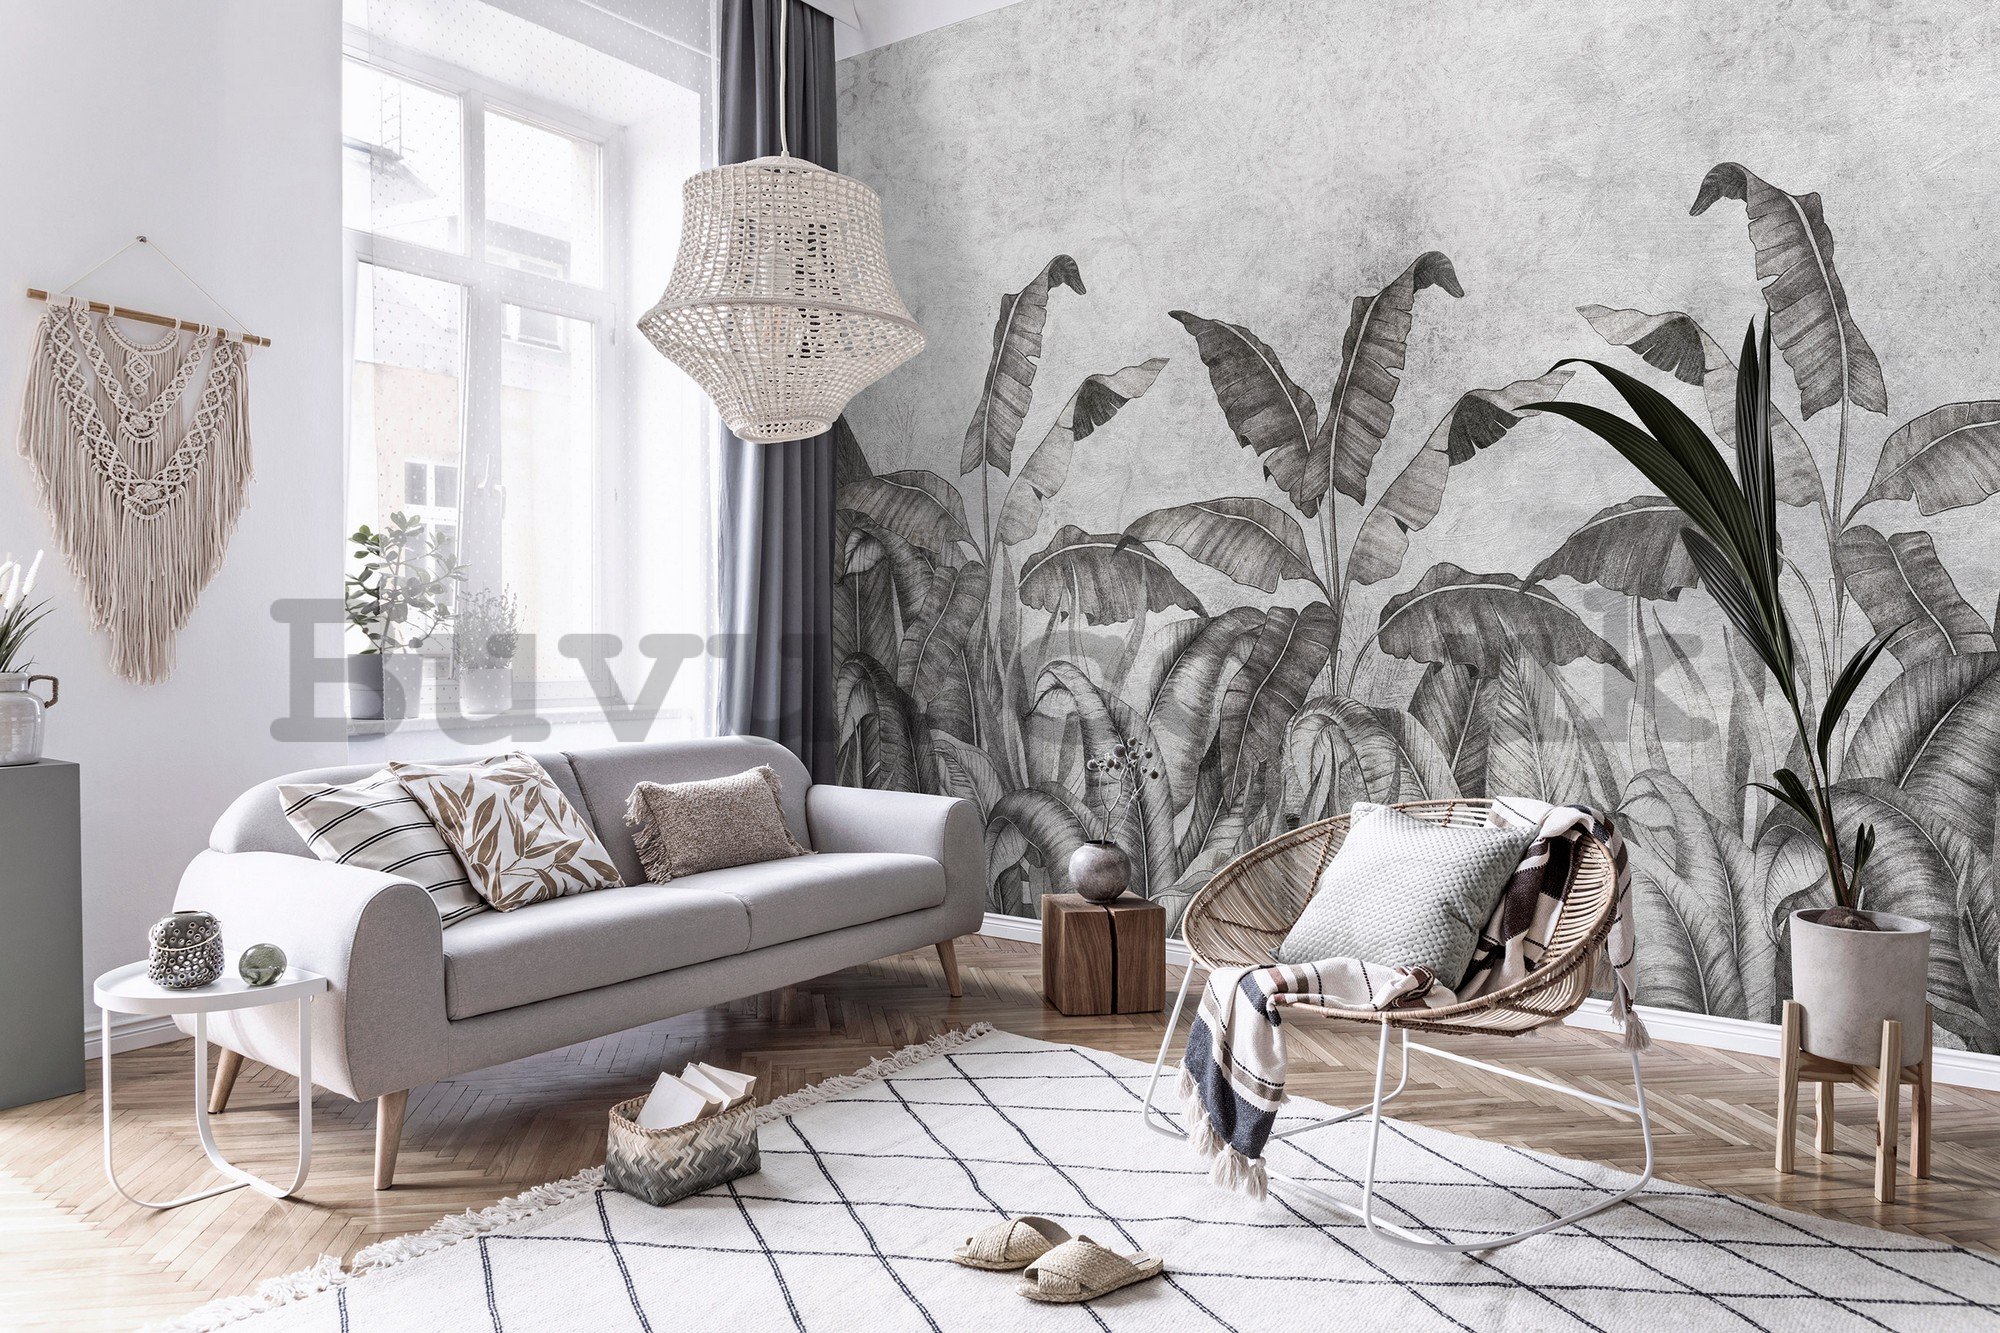 Wall mural vlies: Black and white imitation of natural leave (2) - 254x184 cm